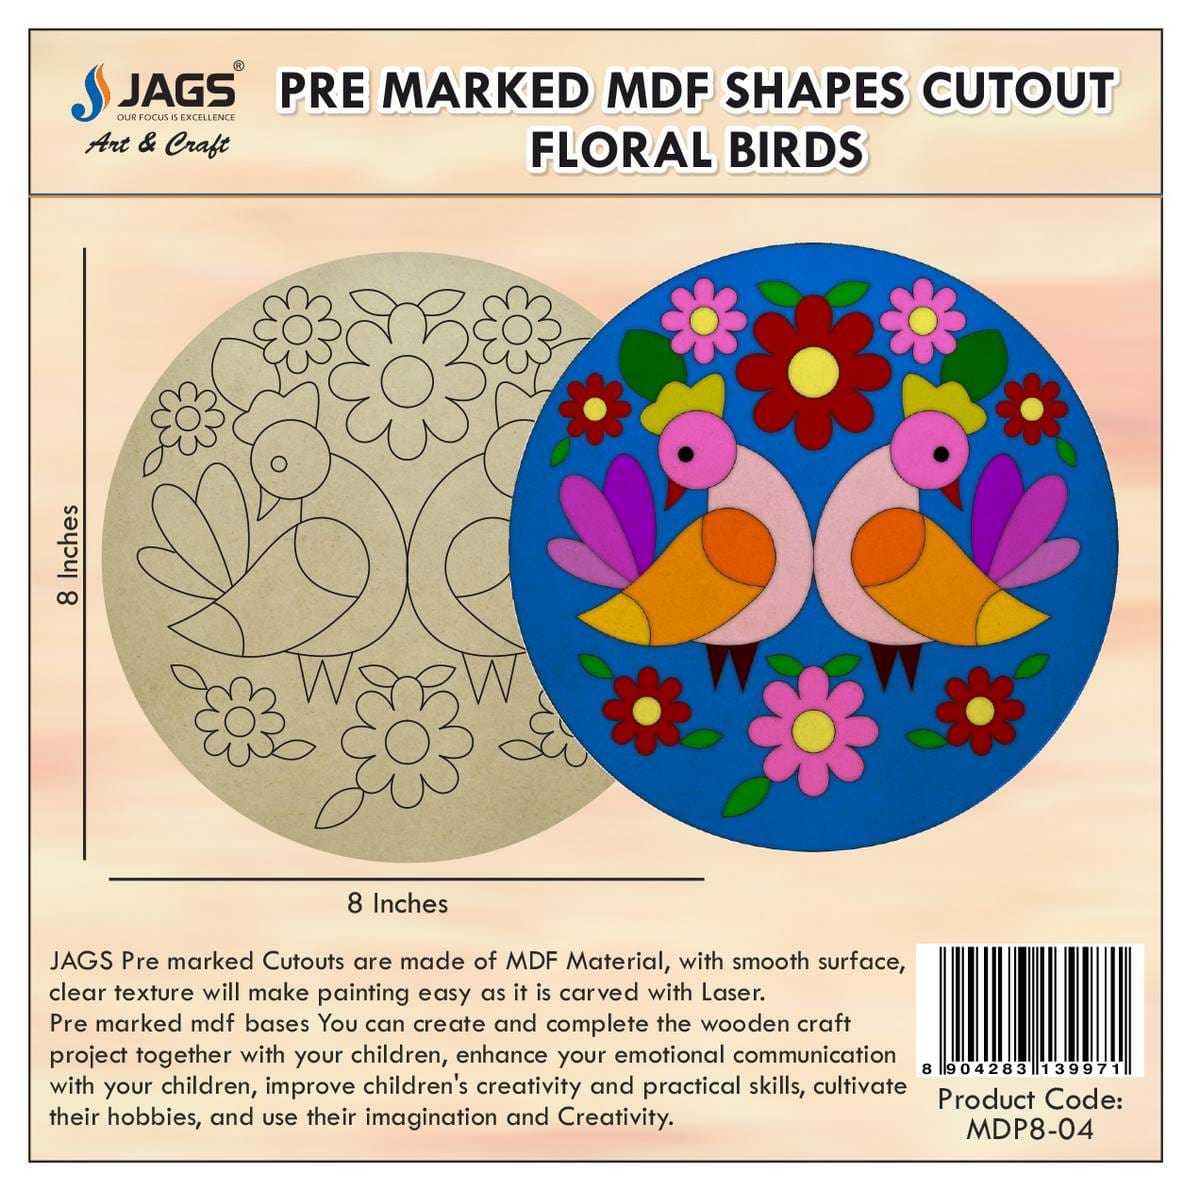 jags-mumbai MDF Pre-marked MDF Floral Bird Shapes Cutout for Pichwai Painting and DIY Crafts